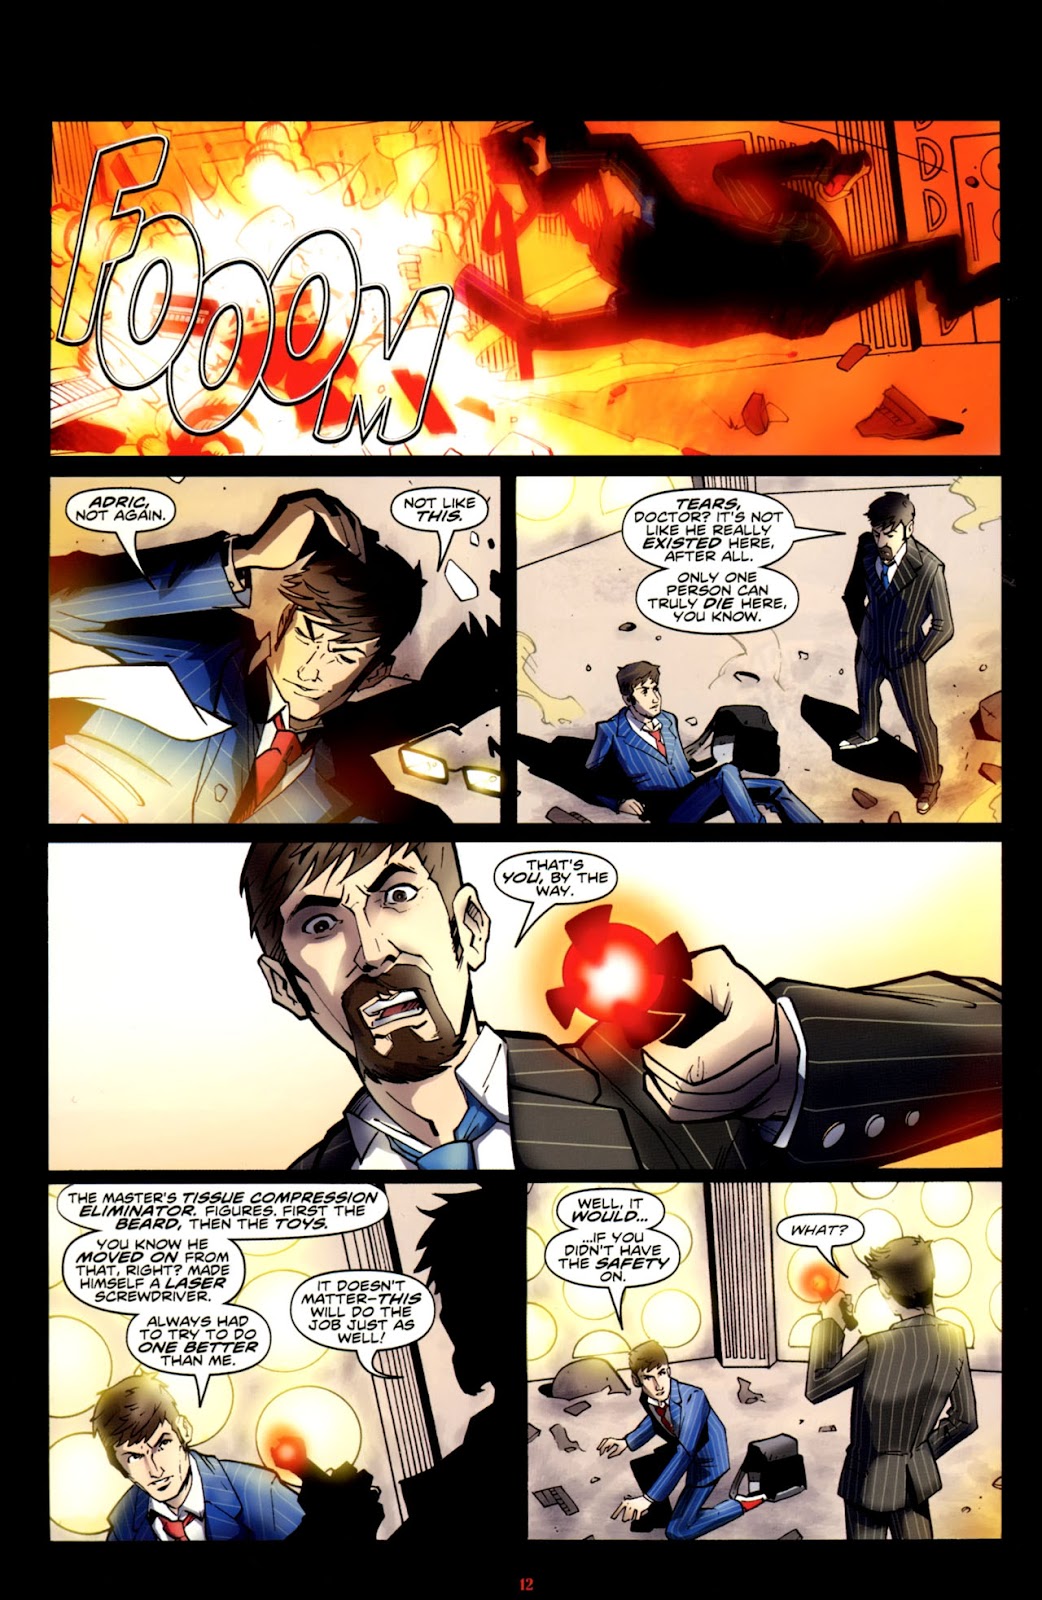 Doctor Who: The Forgotten issue 6 - Page 14